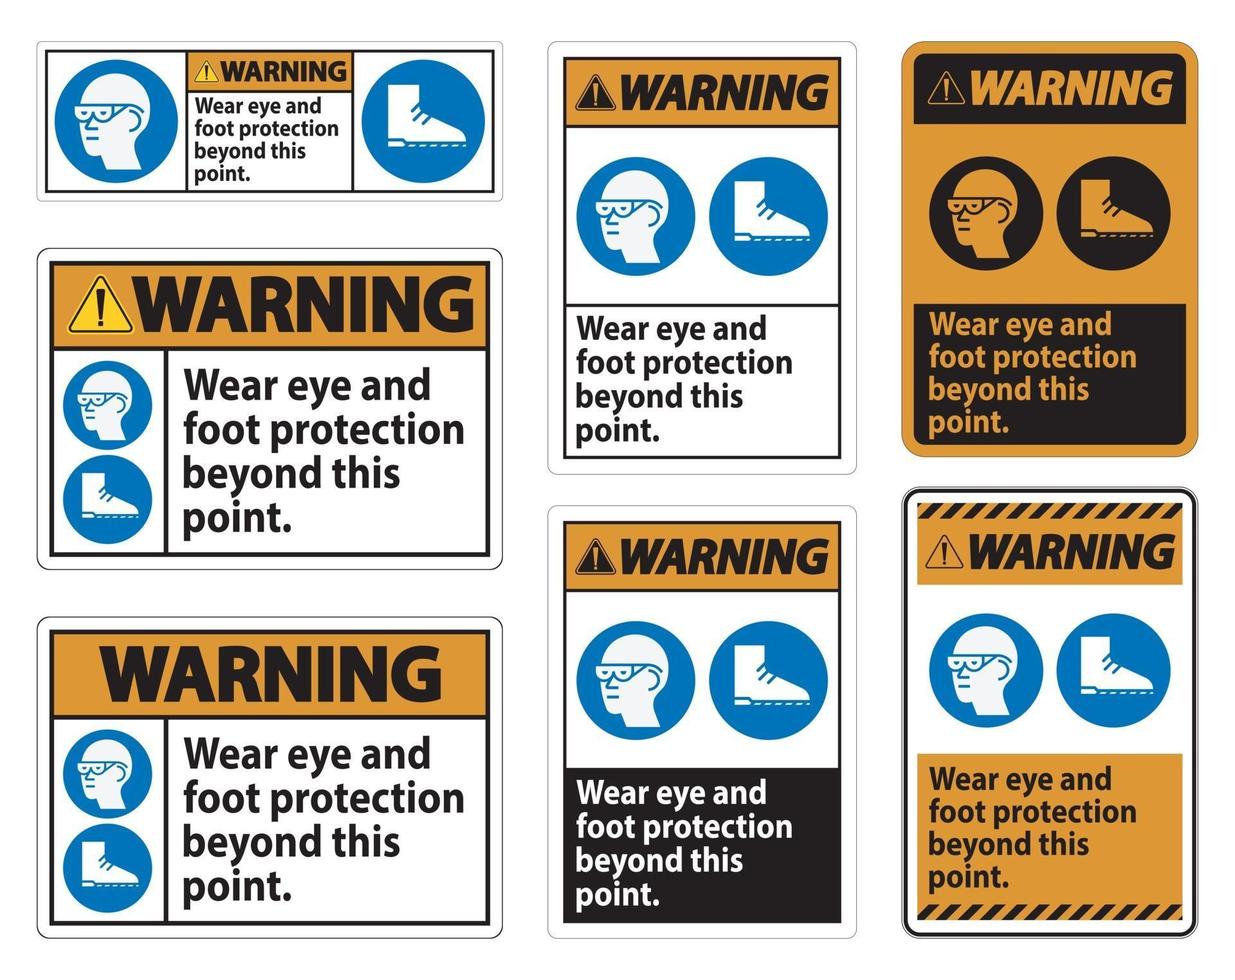 Warning Sign Wear Eye And Foot Protection Beyond This Point With PPE Symbols vector